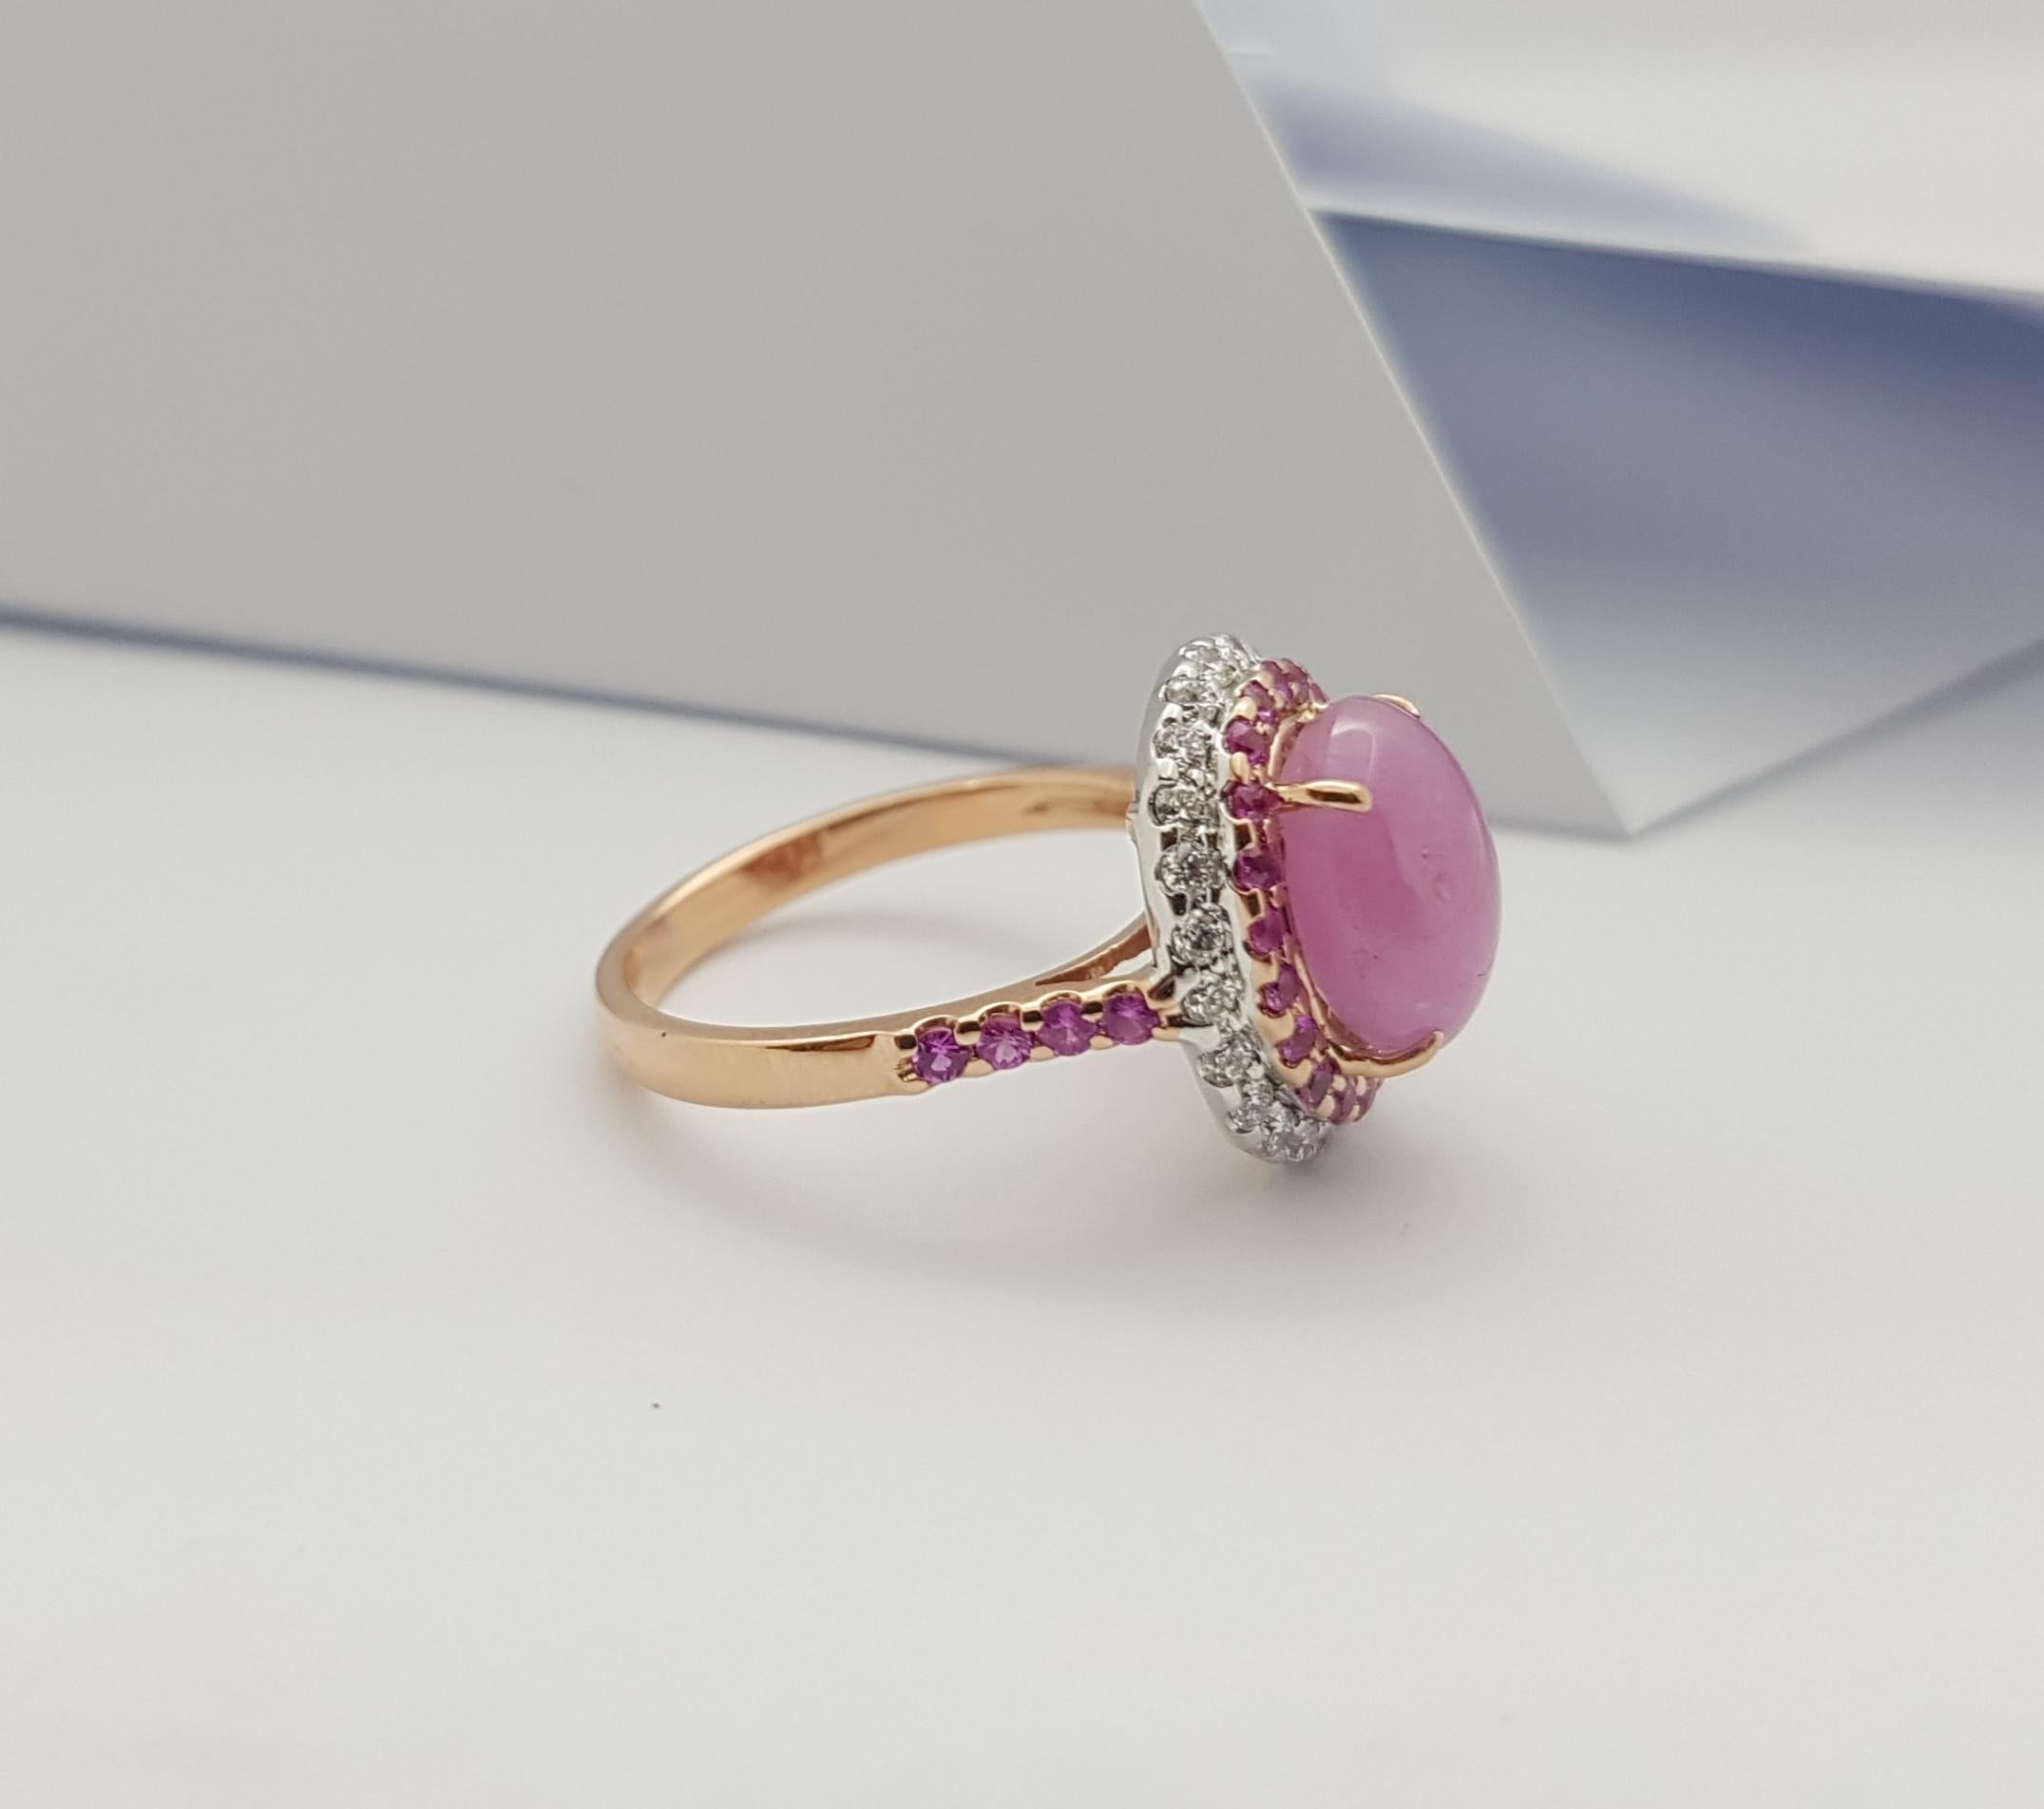 Certified Unheated Star Pink Sapphire, Diamond Ring in 18K Rose Gold For Sale 4